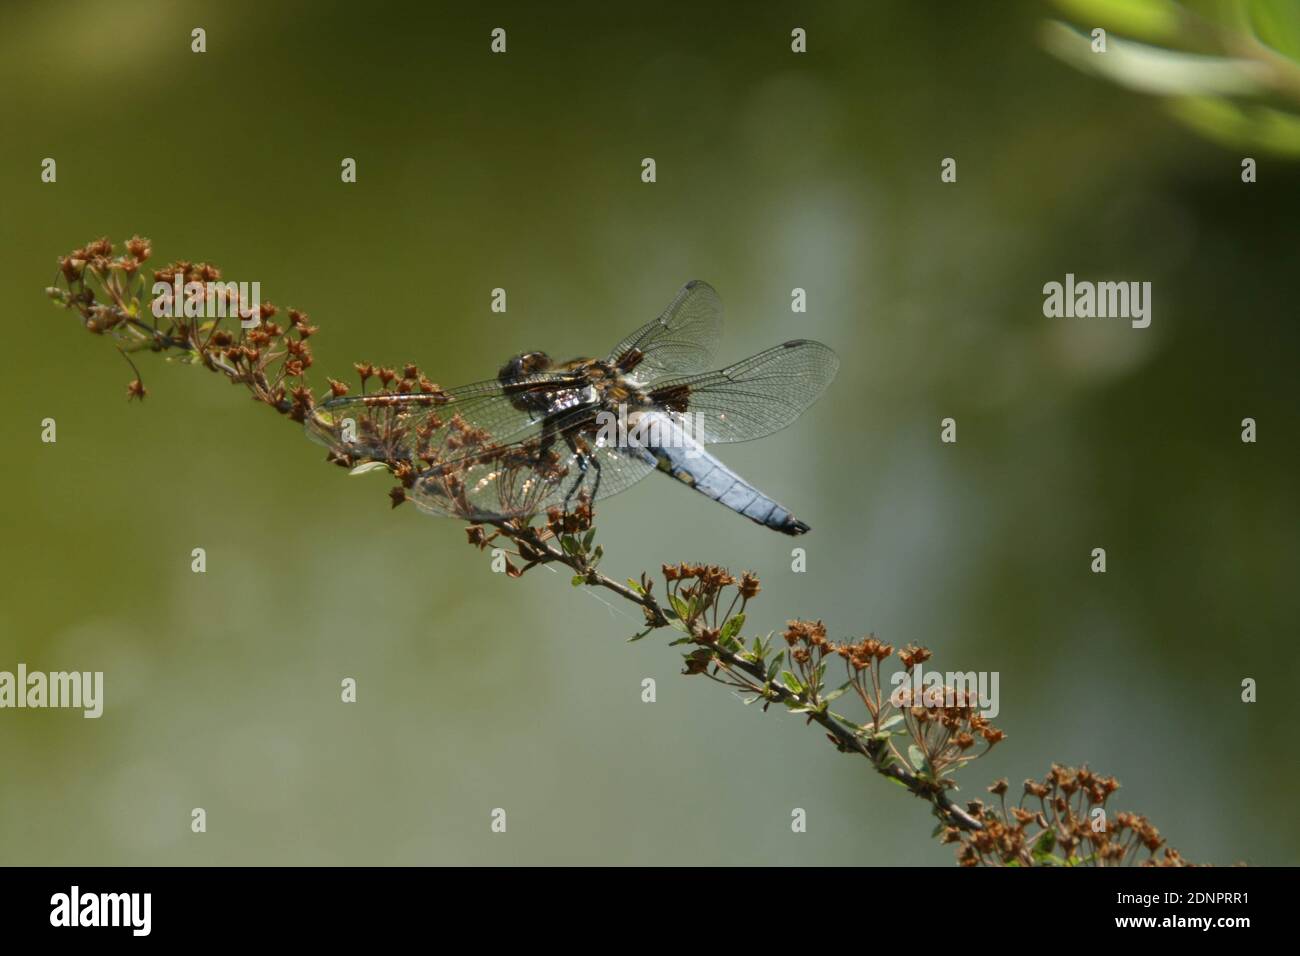 Dragonfly On Plant Stock Photo